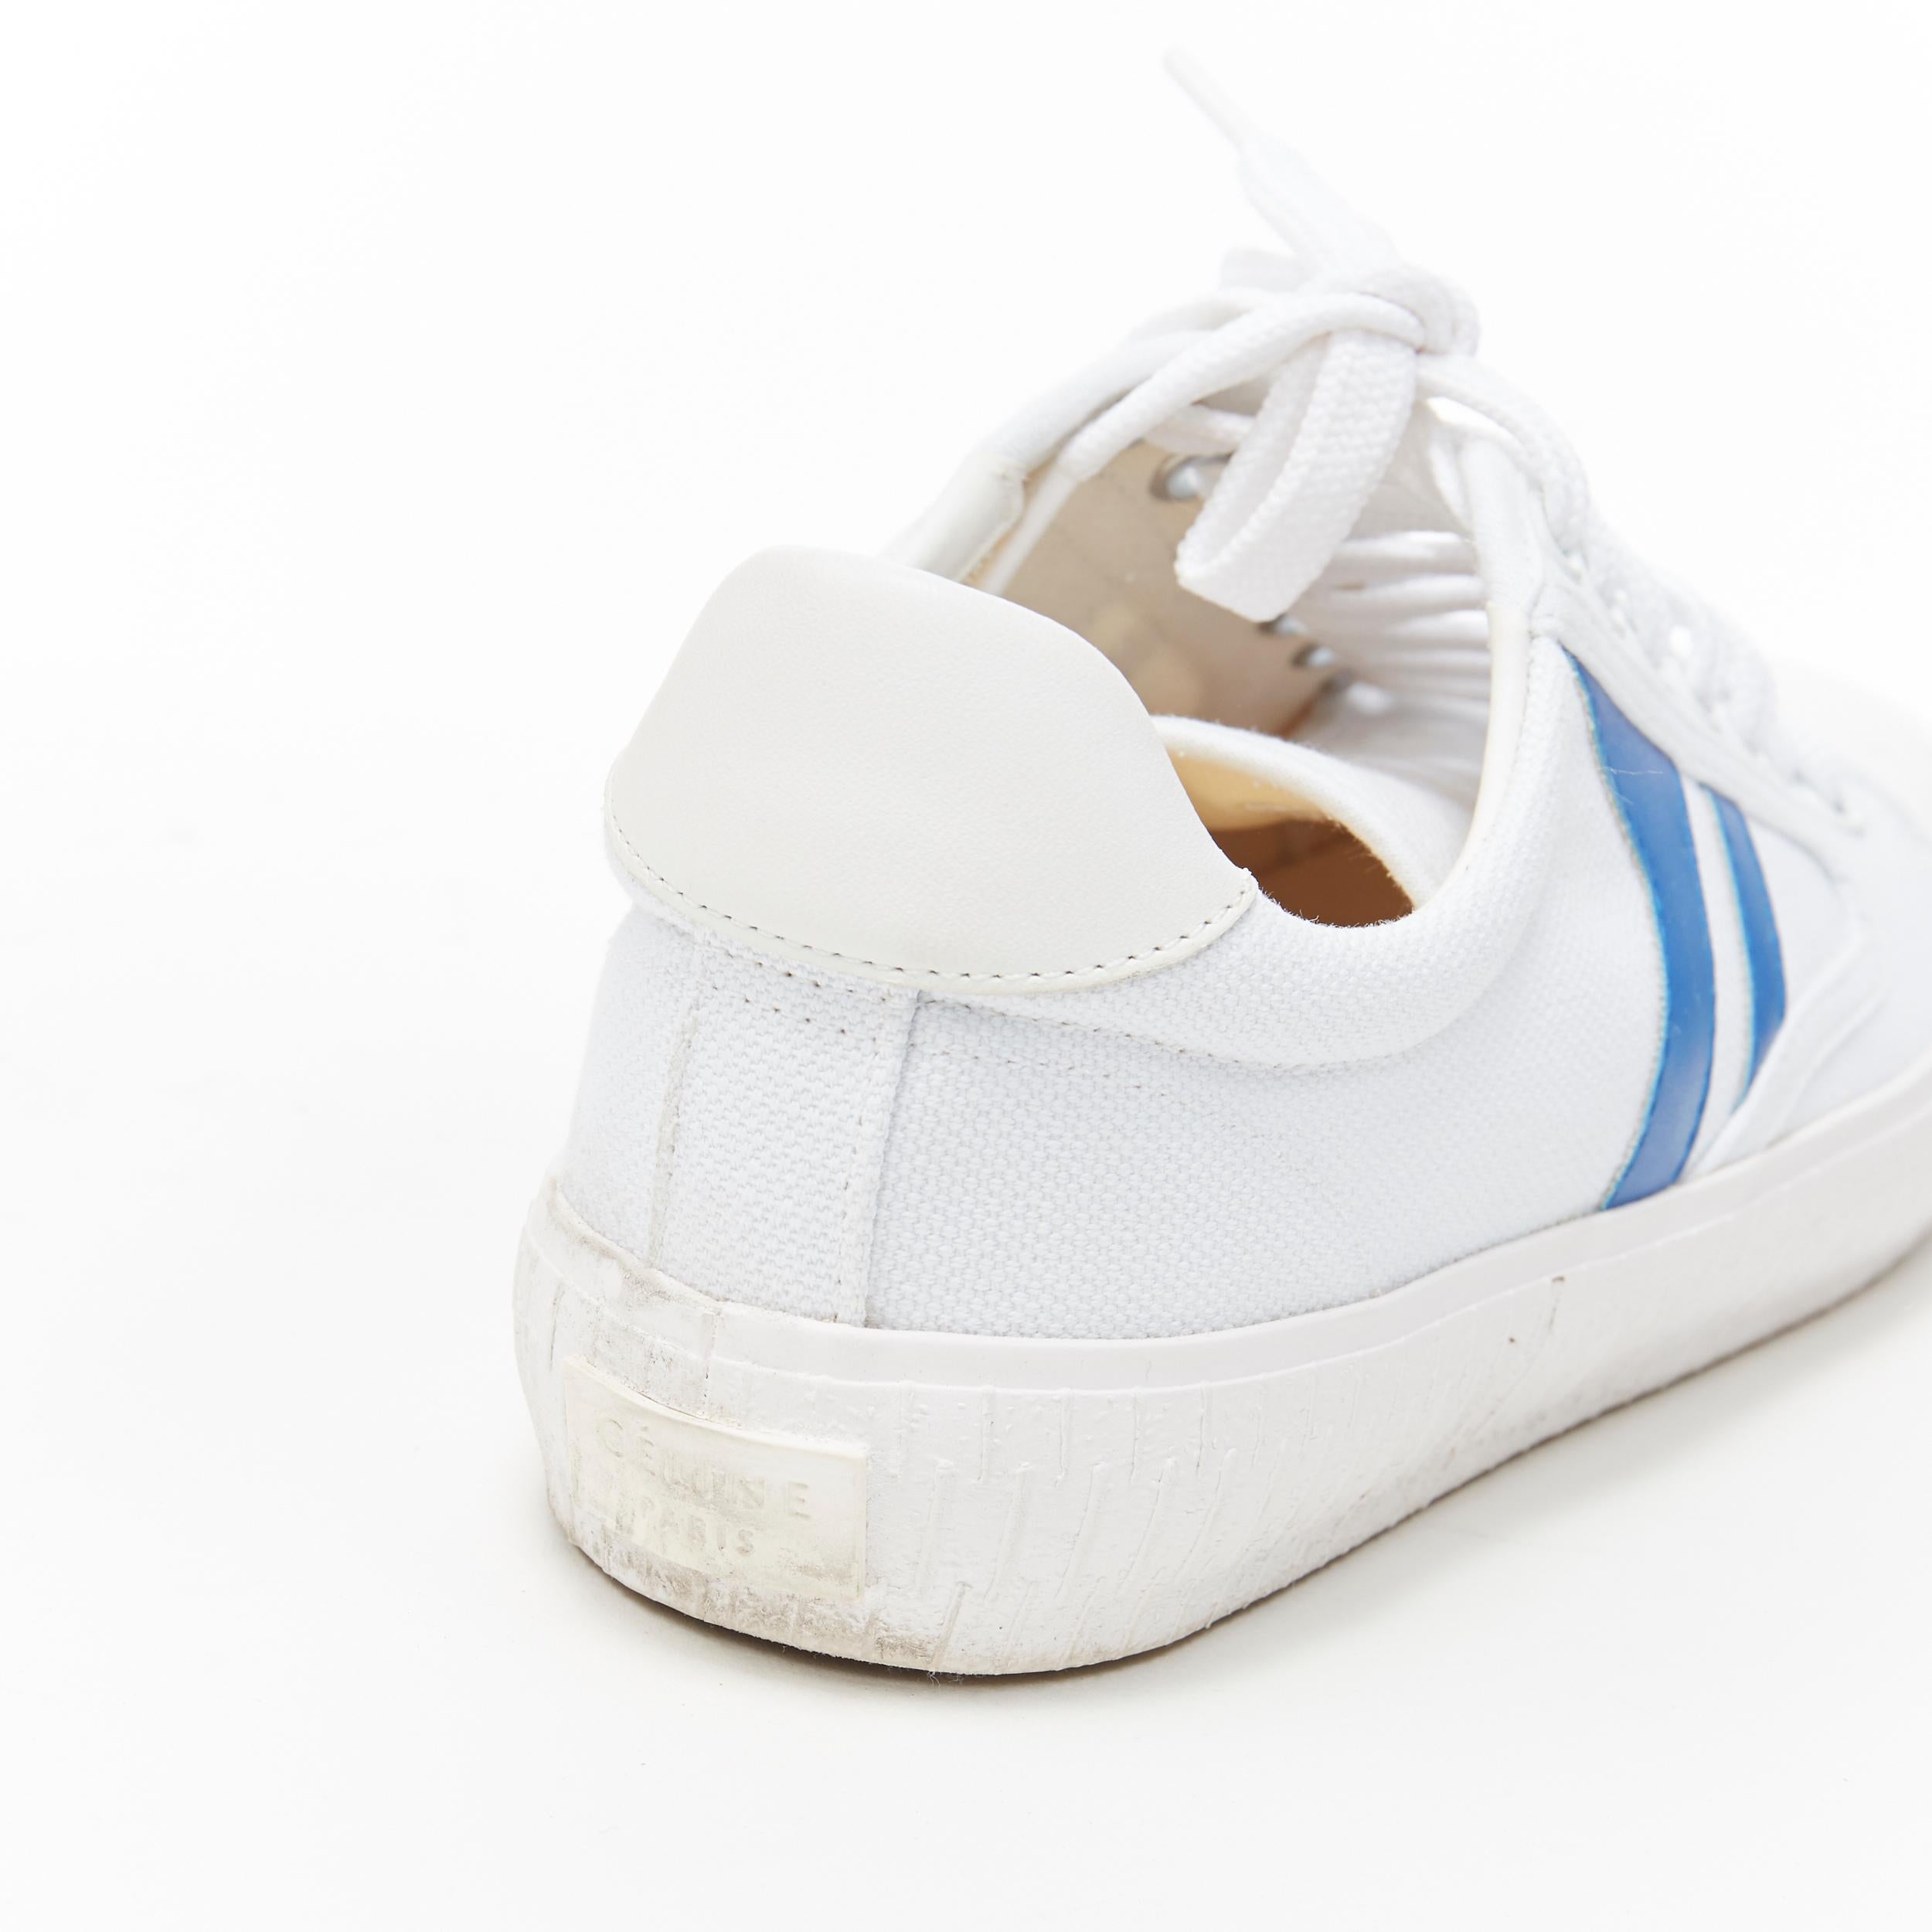 OLD CELINE white blue graphic canvas lace up casusal low top sneakers EU38
Brand: Celine
Designer: Phoebe Philo
Model Name / Style: Low top sneakers
Material: Fabric
Color: White, blue
Pattern: Solid
Closure: Lace up
Extra Detail: Leather insert